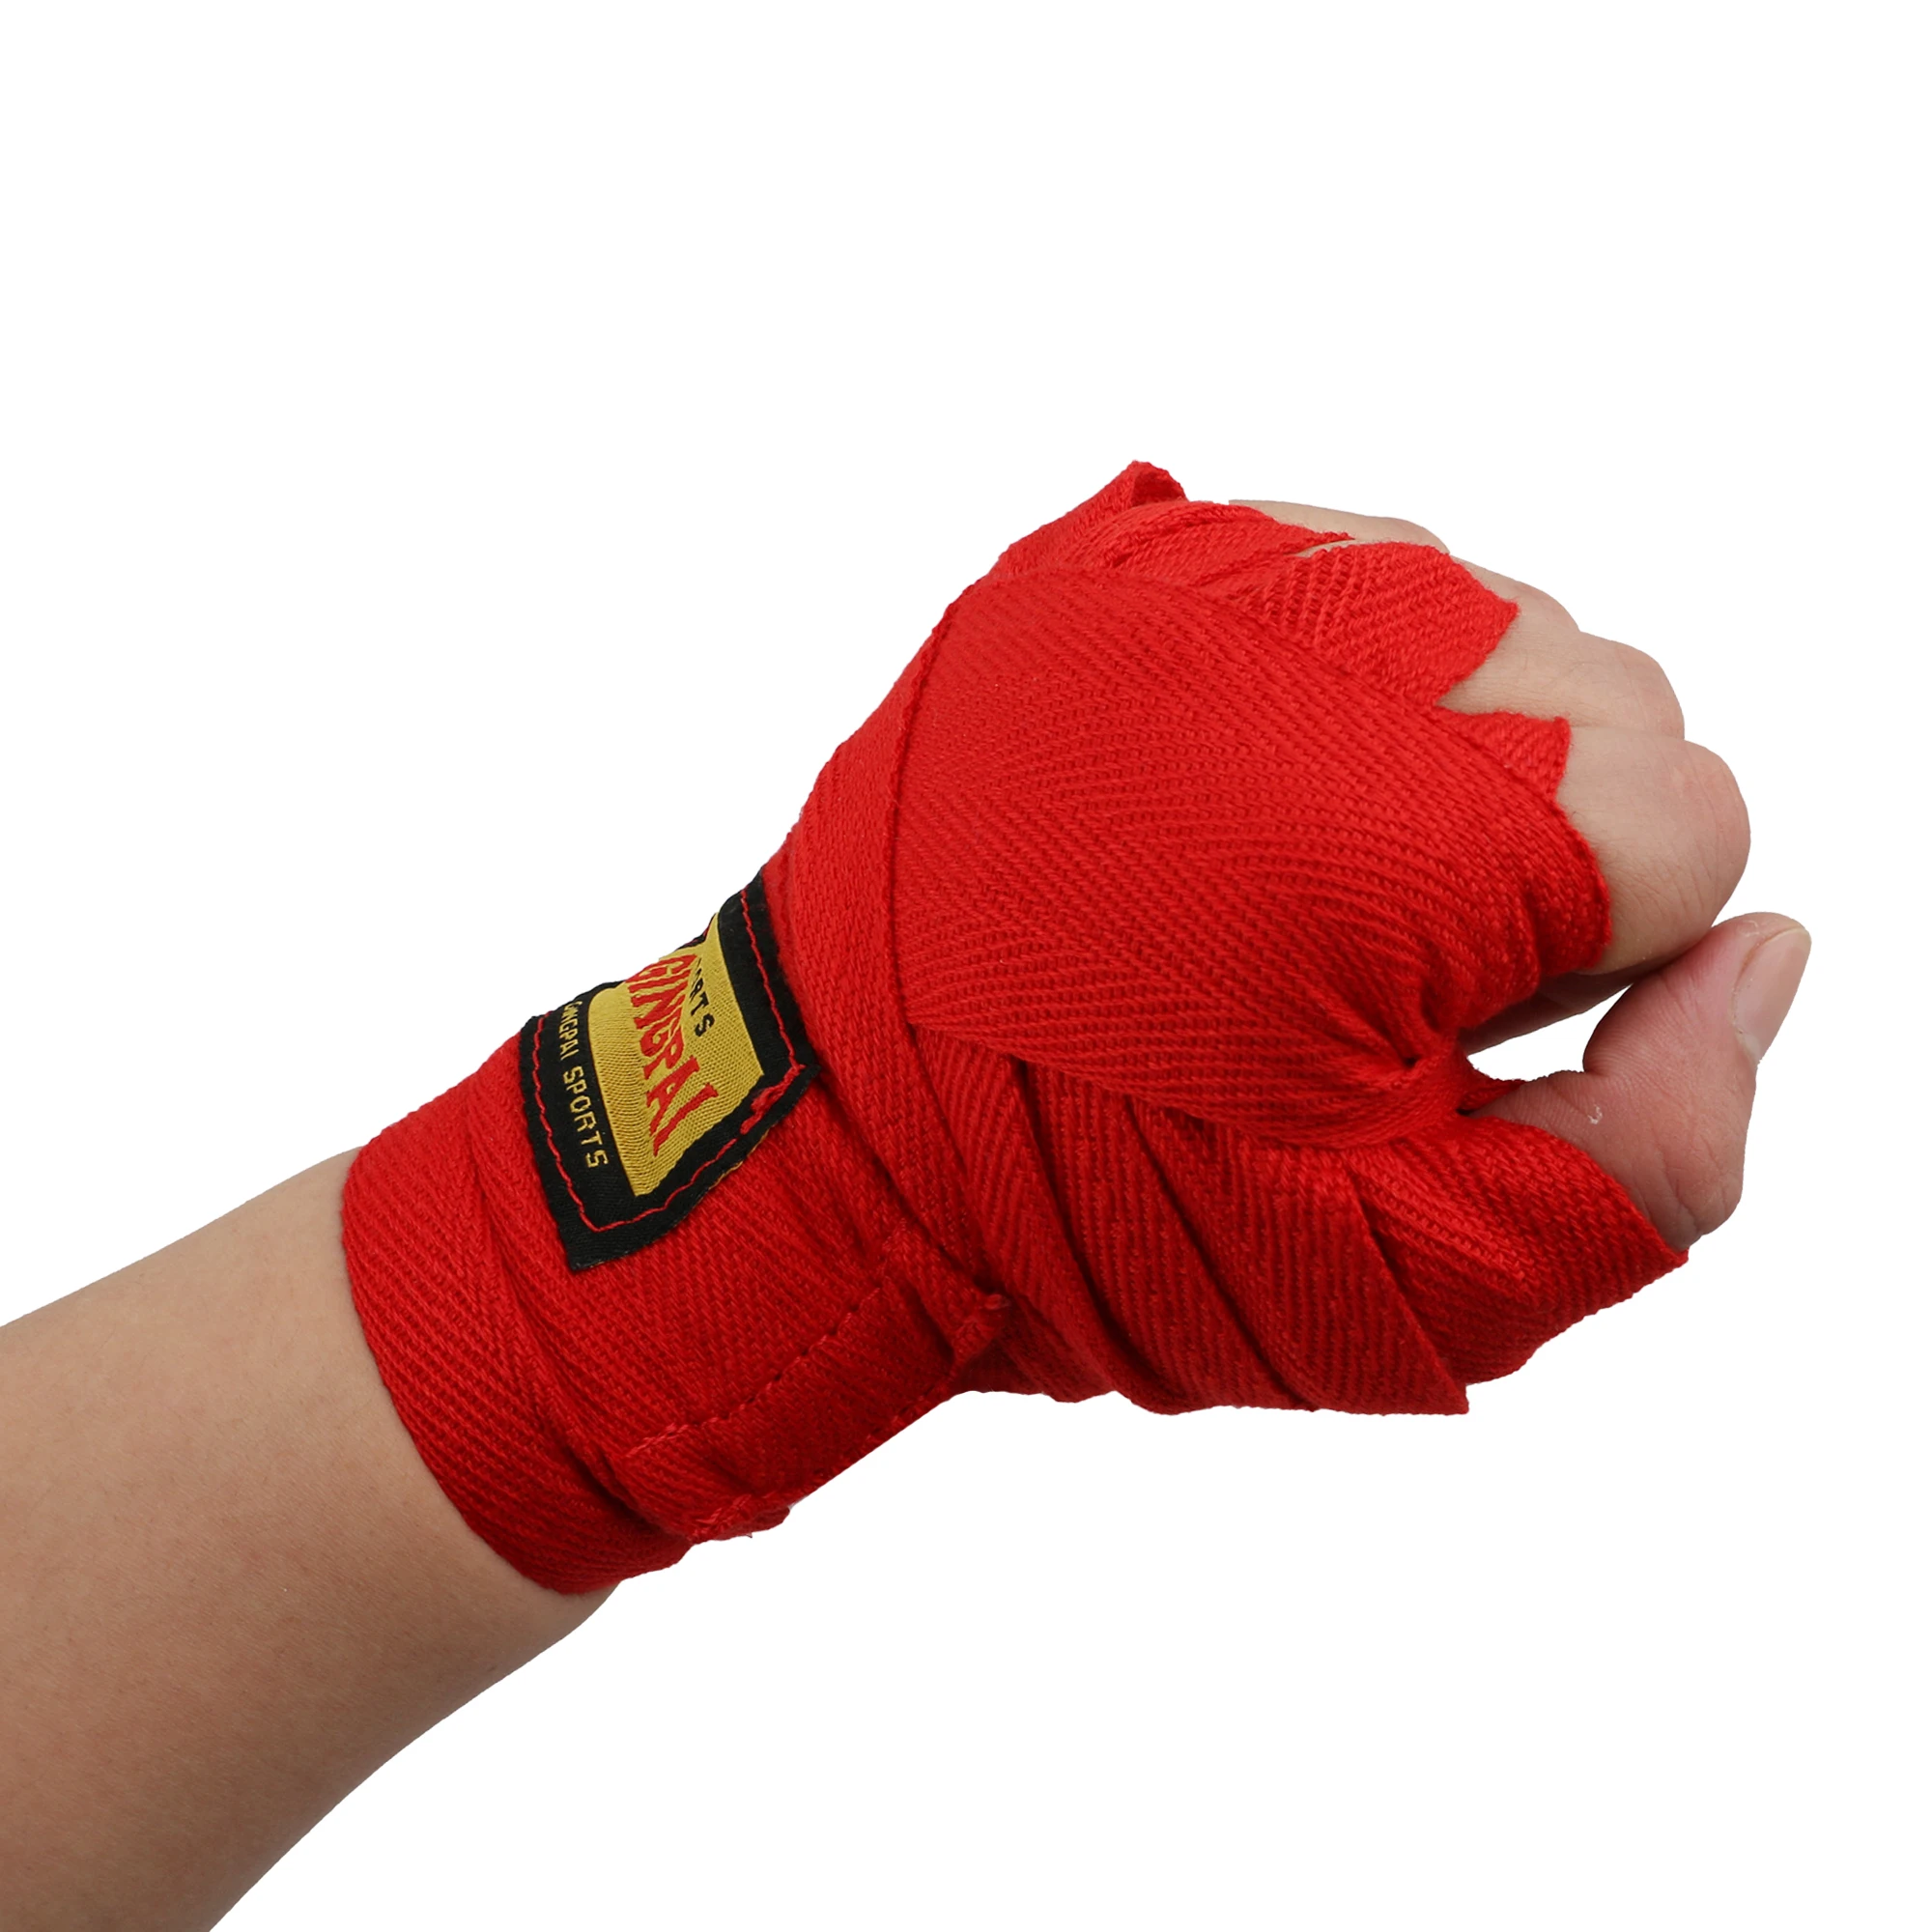 NNT RED PADDED INNER HAND WRAPS BOXING FIST BANDAGES MMA TRAINING 